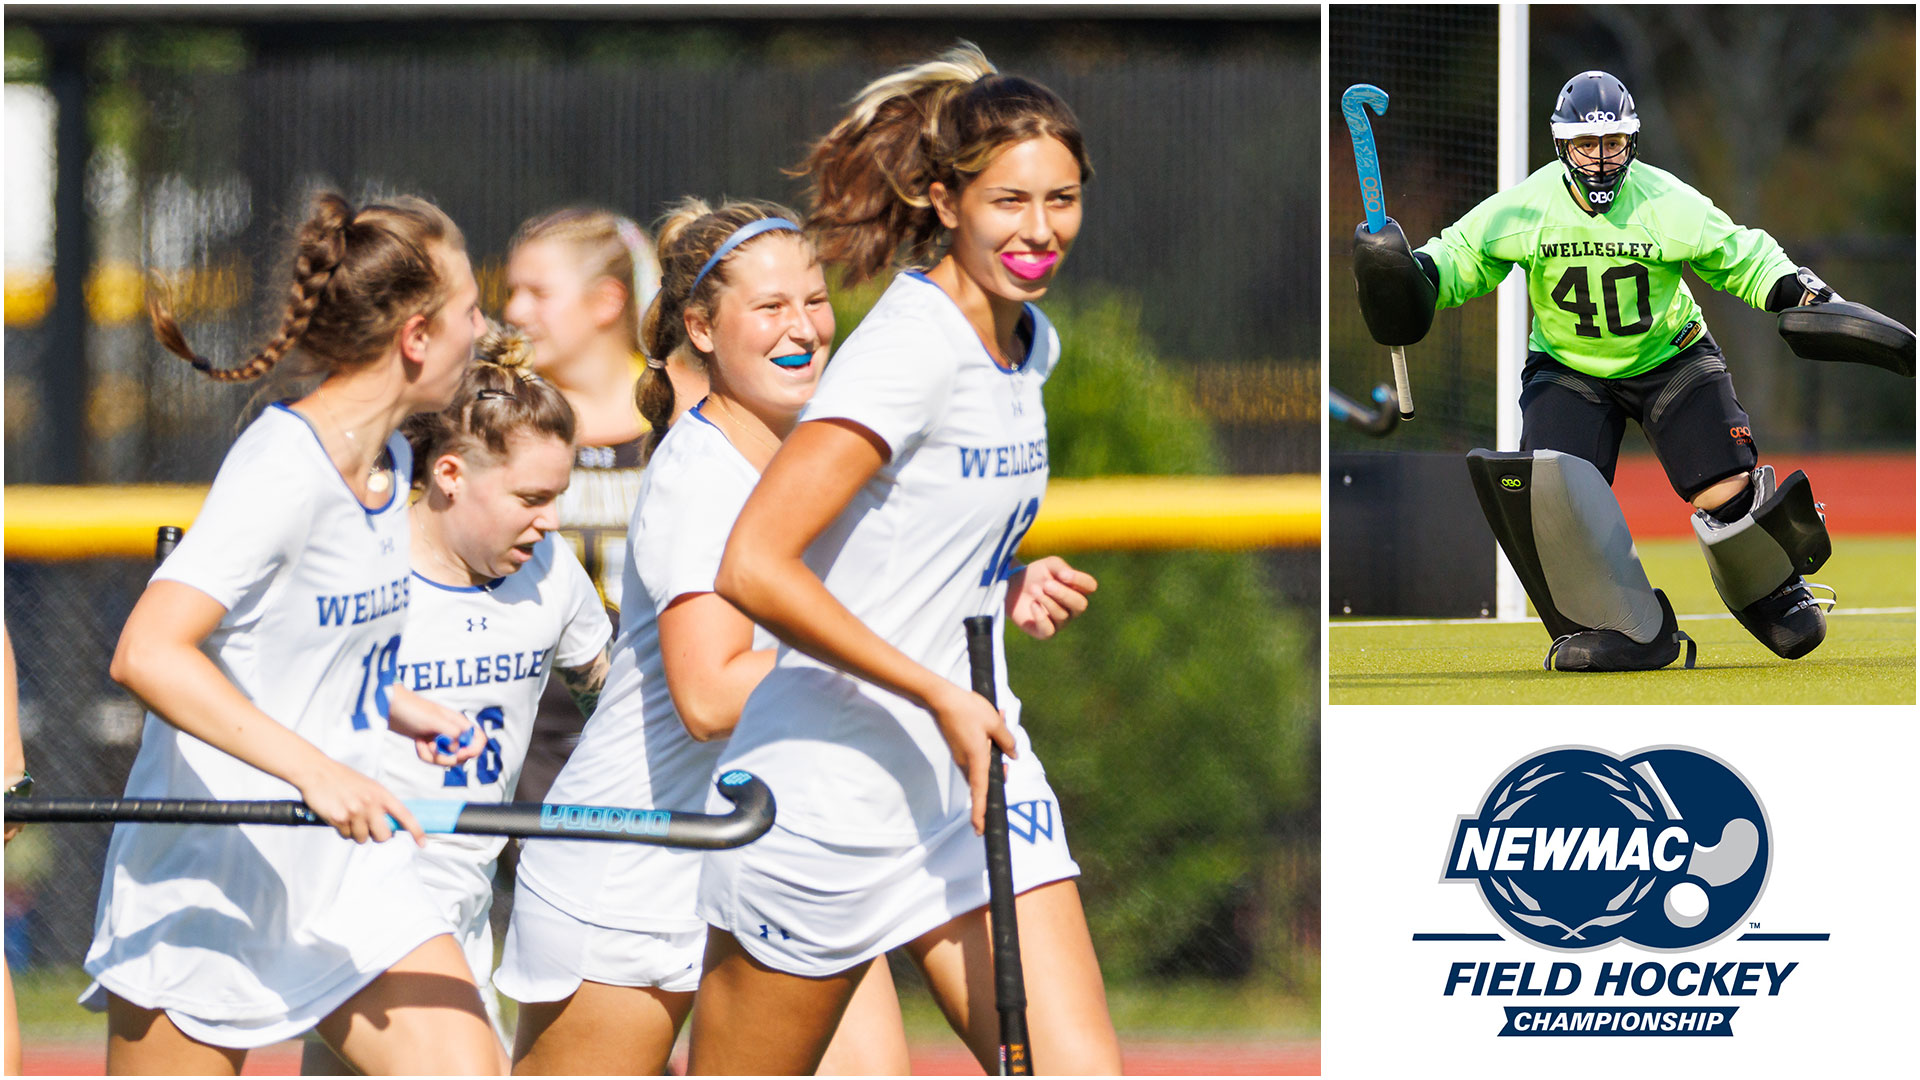 Wellesley field hockey will travel to WPI for the NEWMAC Quarterfinals on Tuesday, October 31 at 6:00 PM (Frank Poulin)